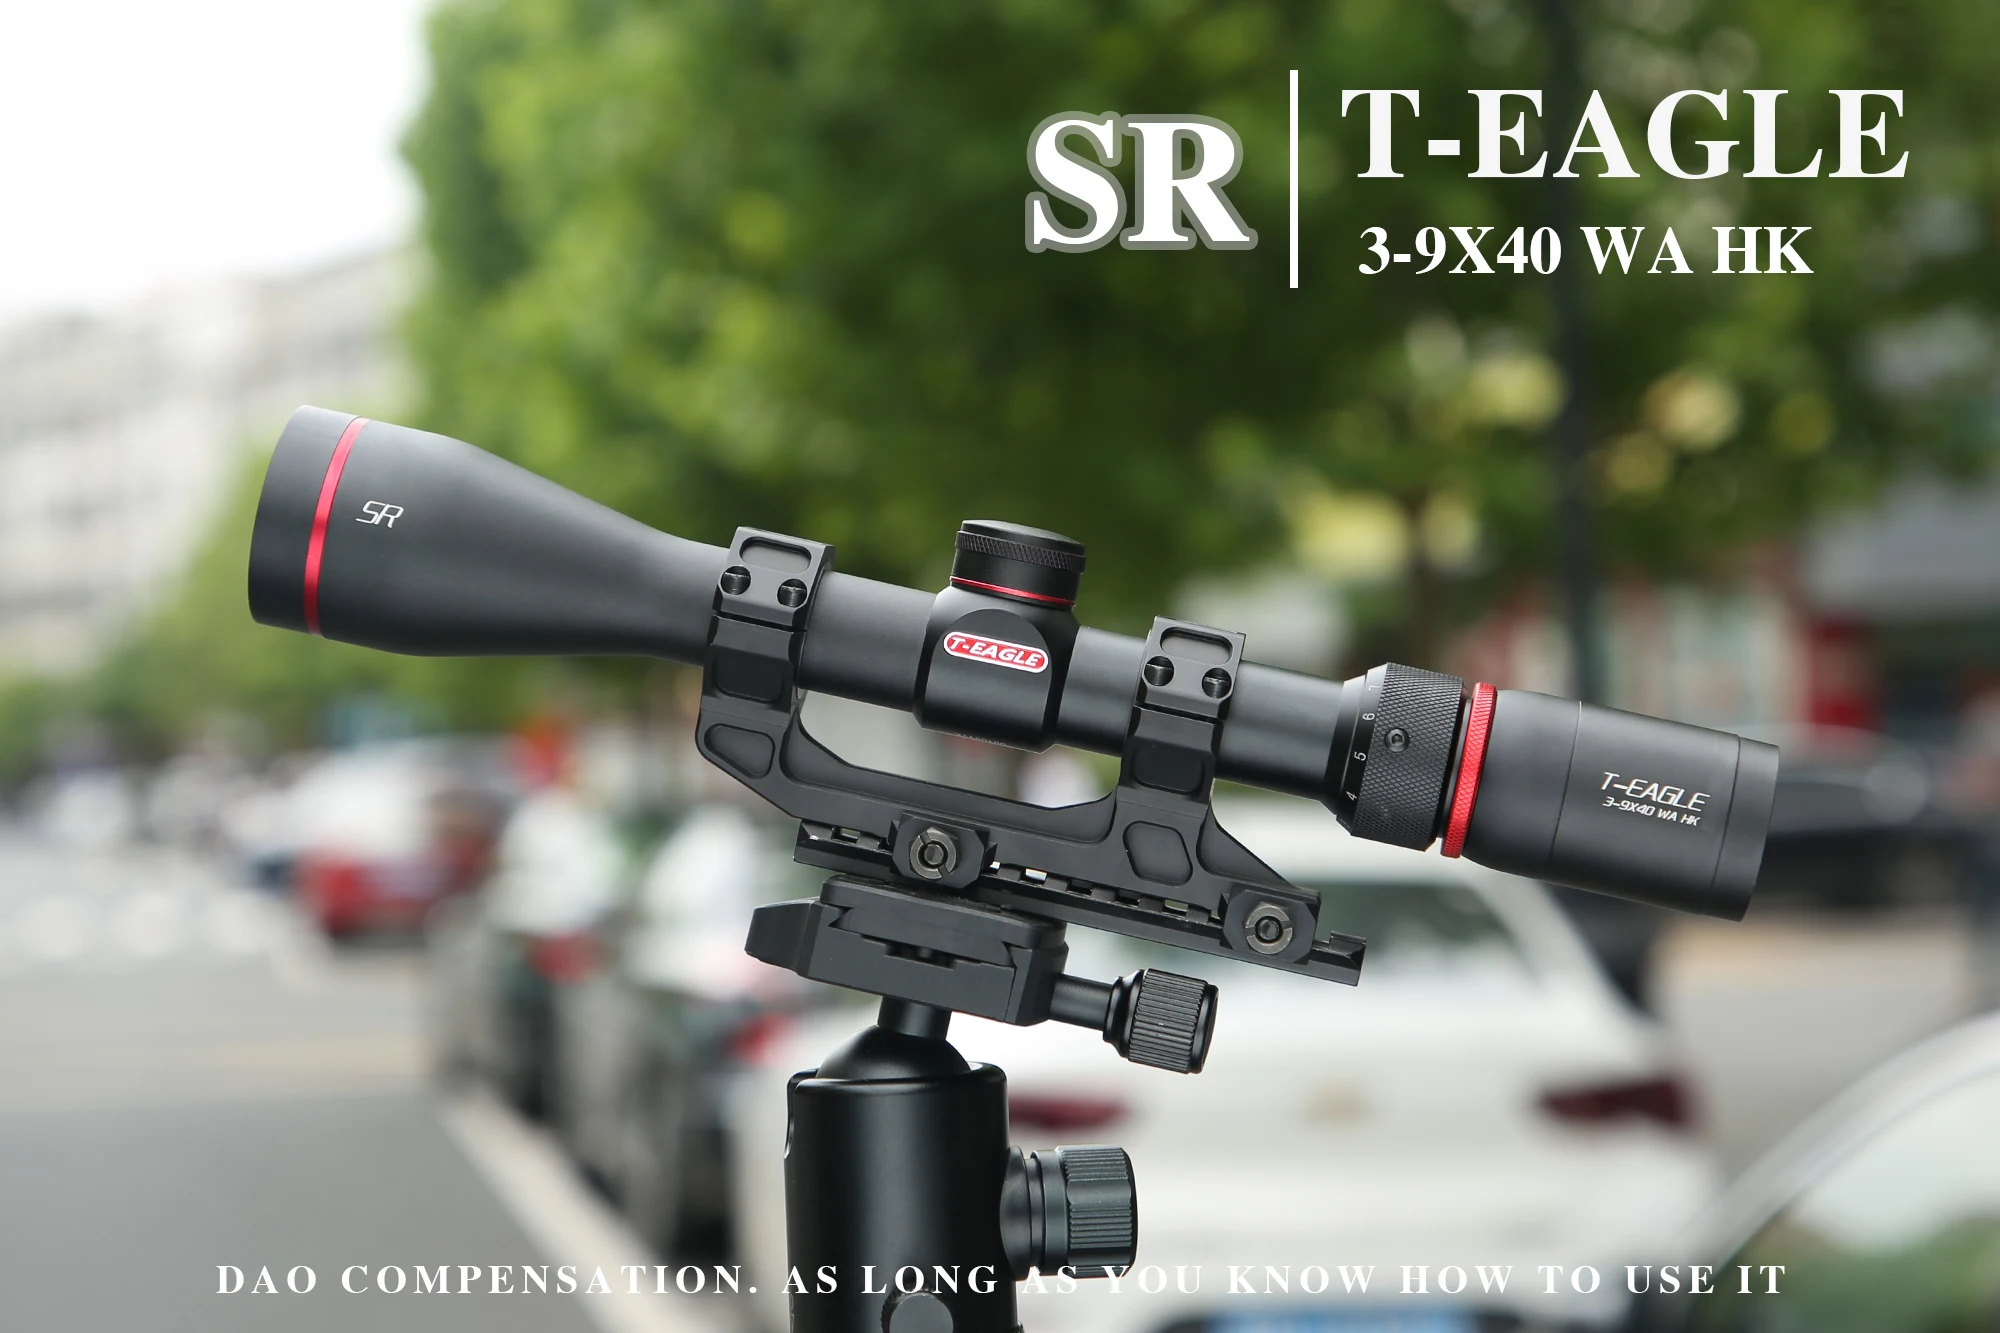 

T-eagle SR 3-9X40 WA HK Tactical Optical Sight Air Gun Rifle Scopes Sniper Riflescopes For Hunting Wide Angle Airsoft Sight